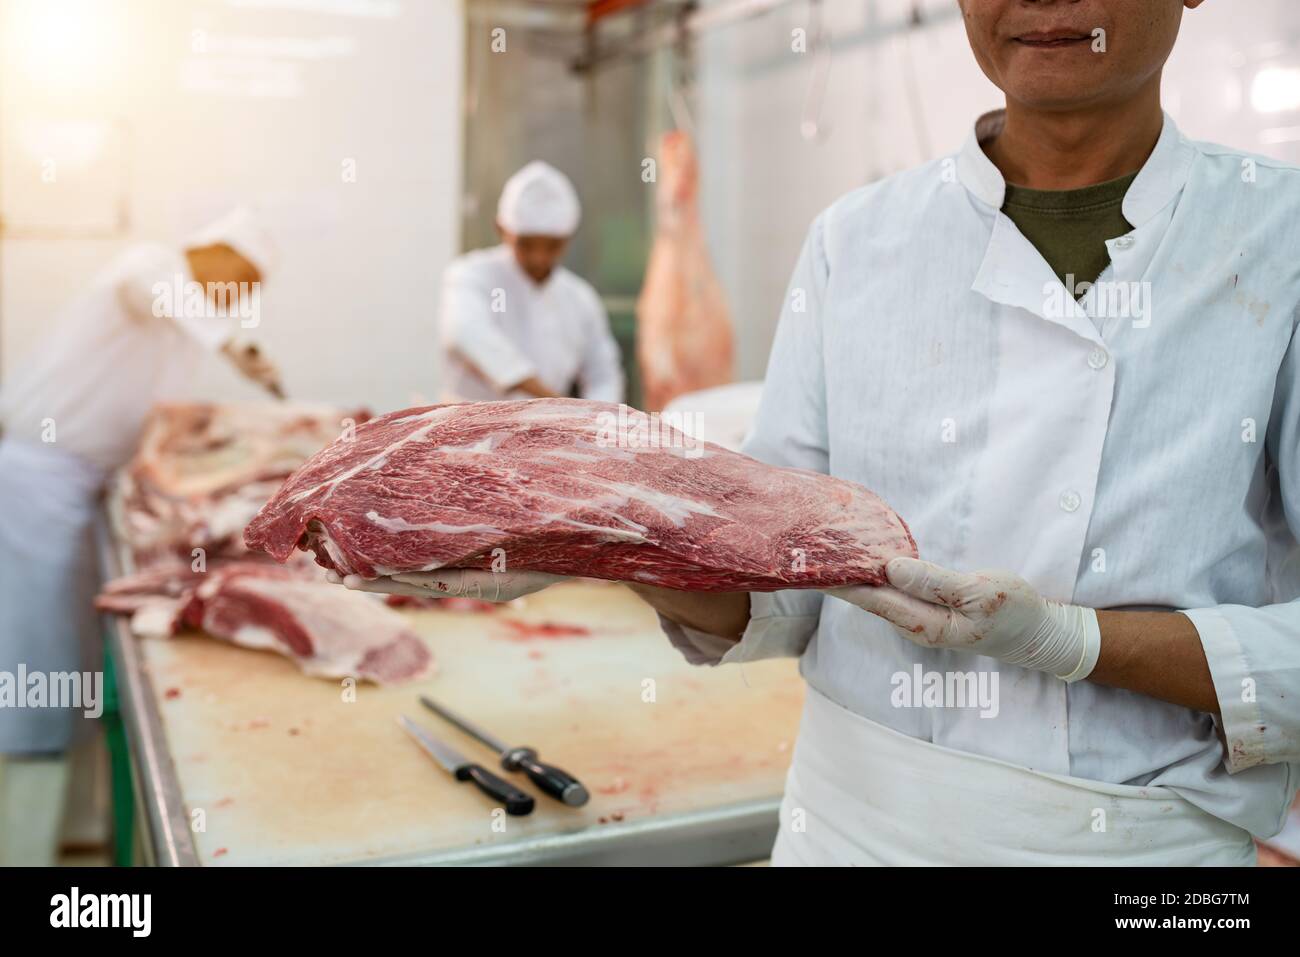 Premium wagyu beef in the process by the butcher in the slaughterhouse Stock Photo